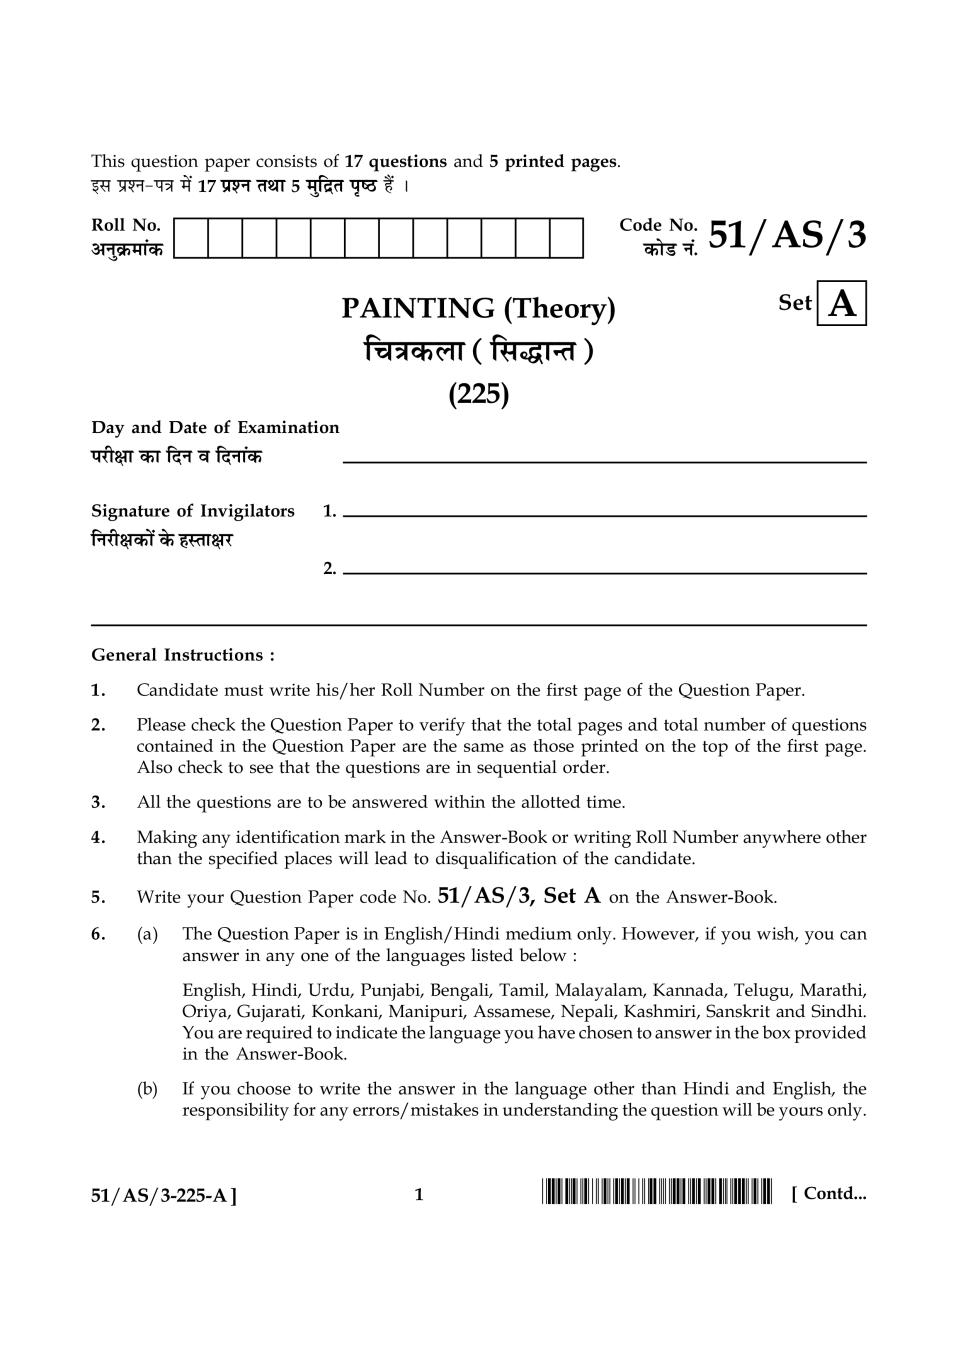 NIOS Class 10 Question Paper Oct 2015 - Painting Theory - Page 1